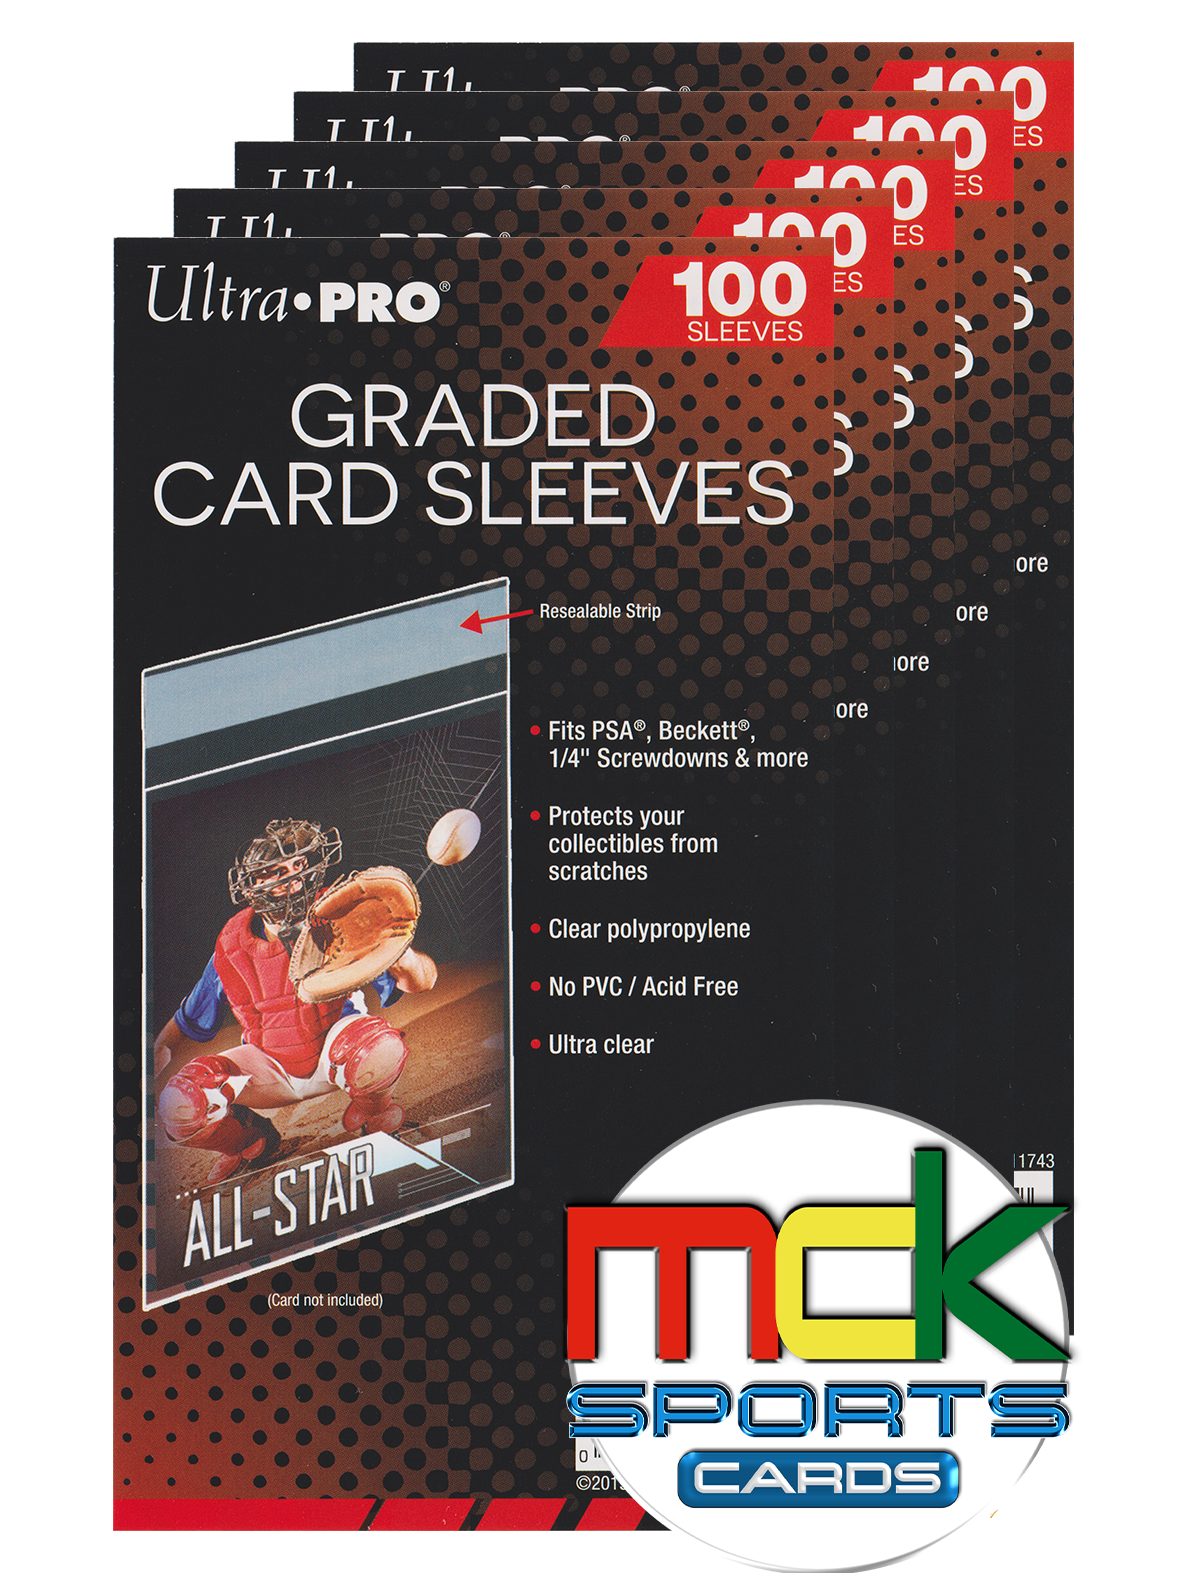 Ultra Pro Graded Card Sleeves - Resealable, Clear Polypropylene, Fits PSA, Beckett & More! 500 Count, 5 Packs of 100